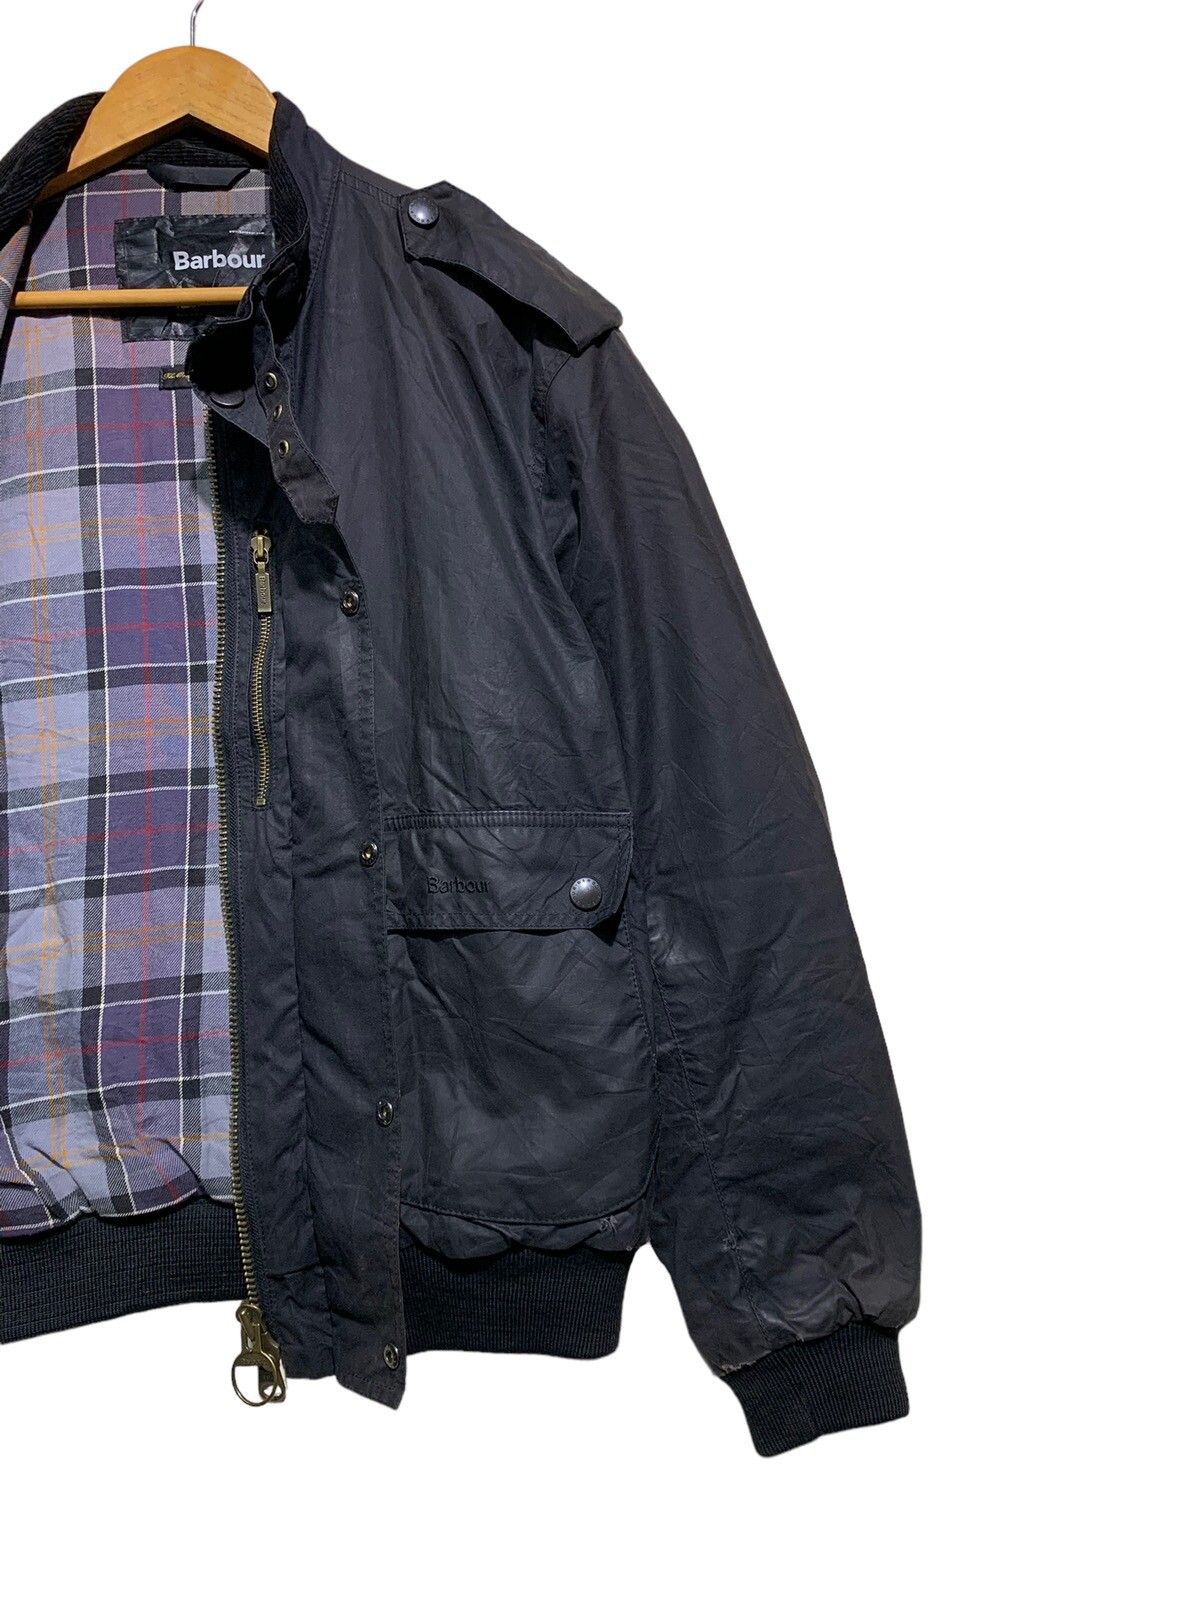 🔥BARBOUR INTERNATIONAL WAXED BOMBER JACKETS - 10